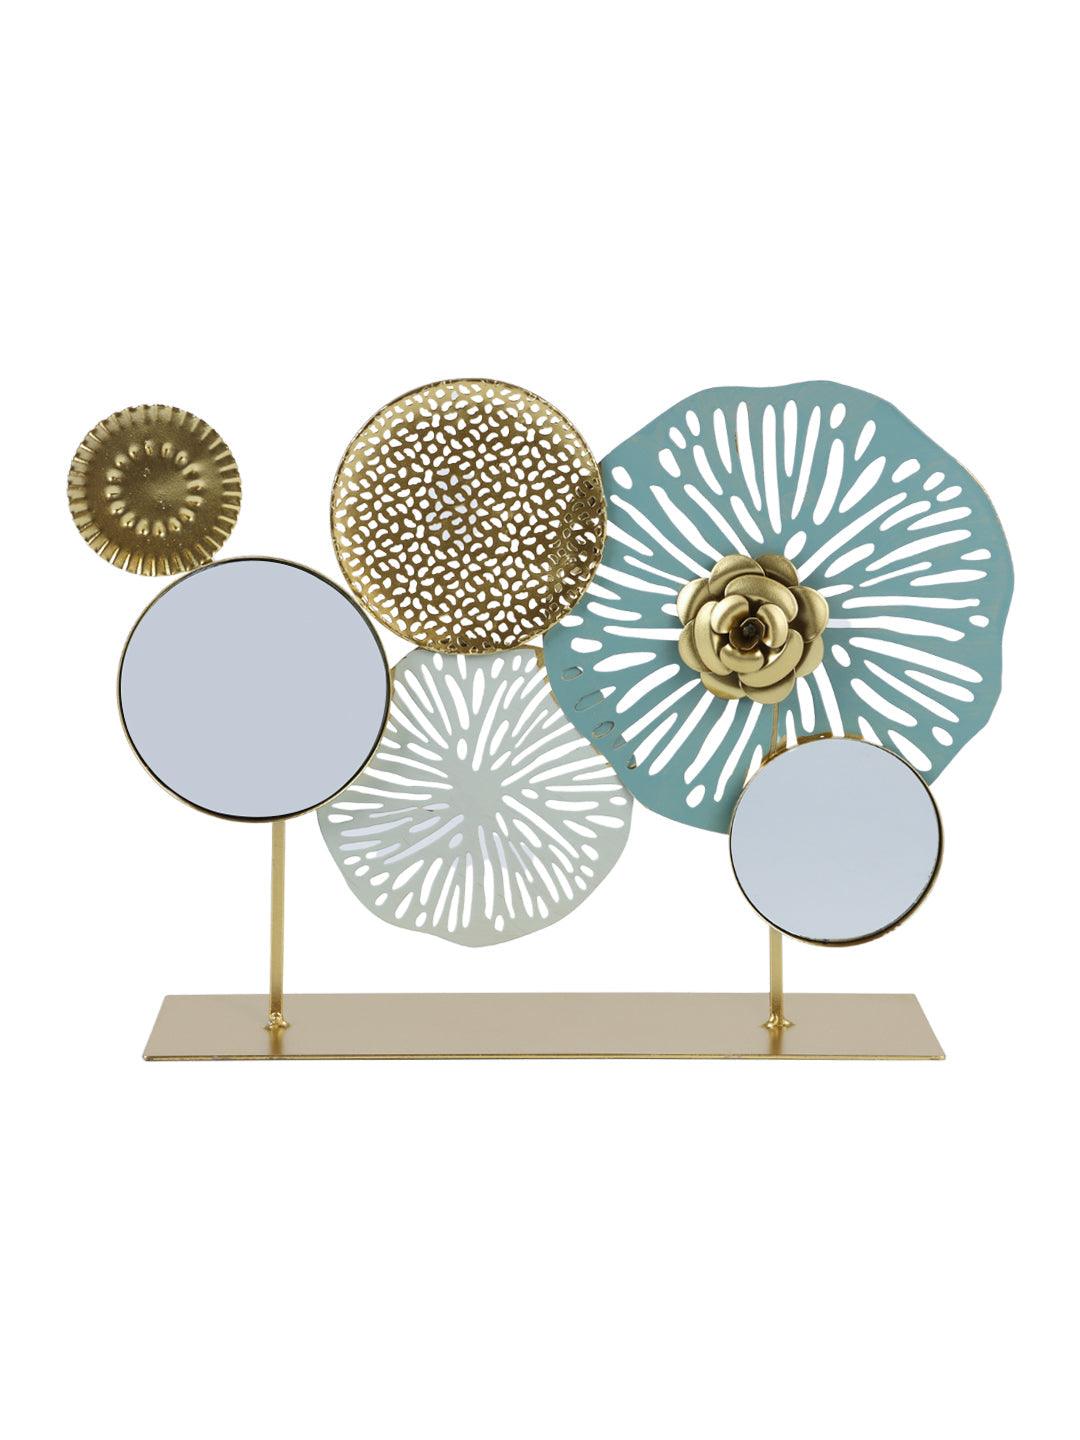 Table Decortive Object Ornament - 2